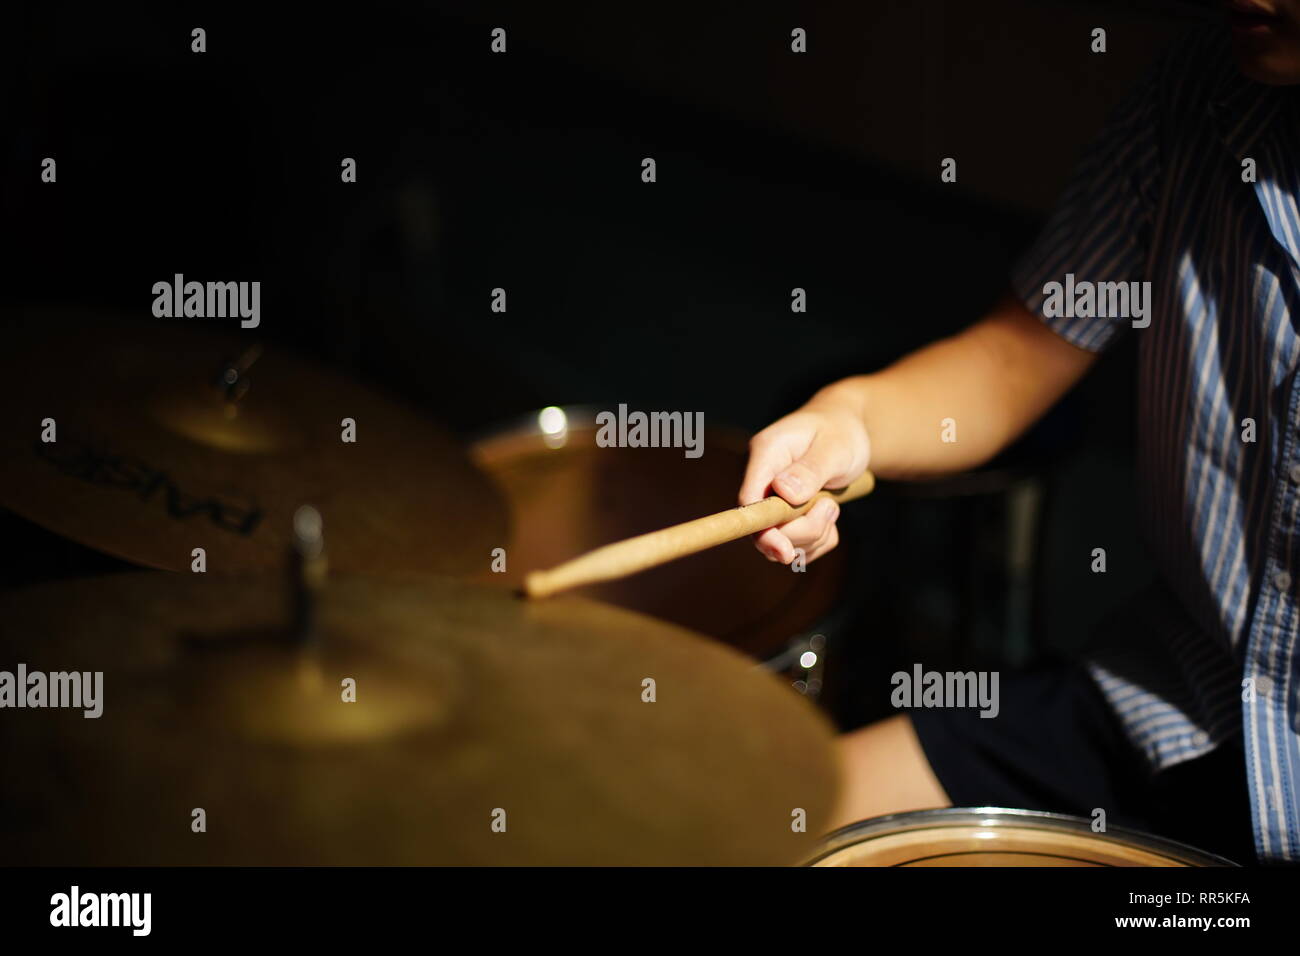 Student learn to play drum | Hand holding stick thumping the drum in the  classroom Stock Photo - Alamy